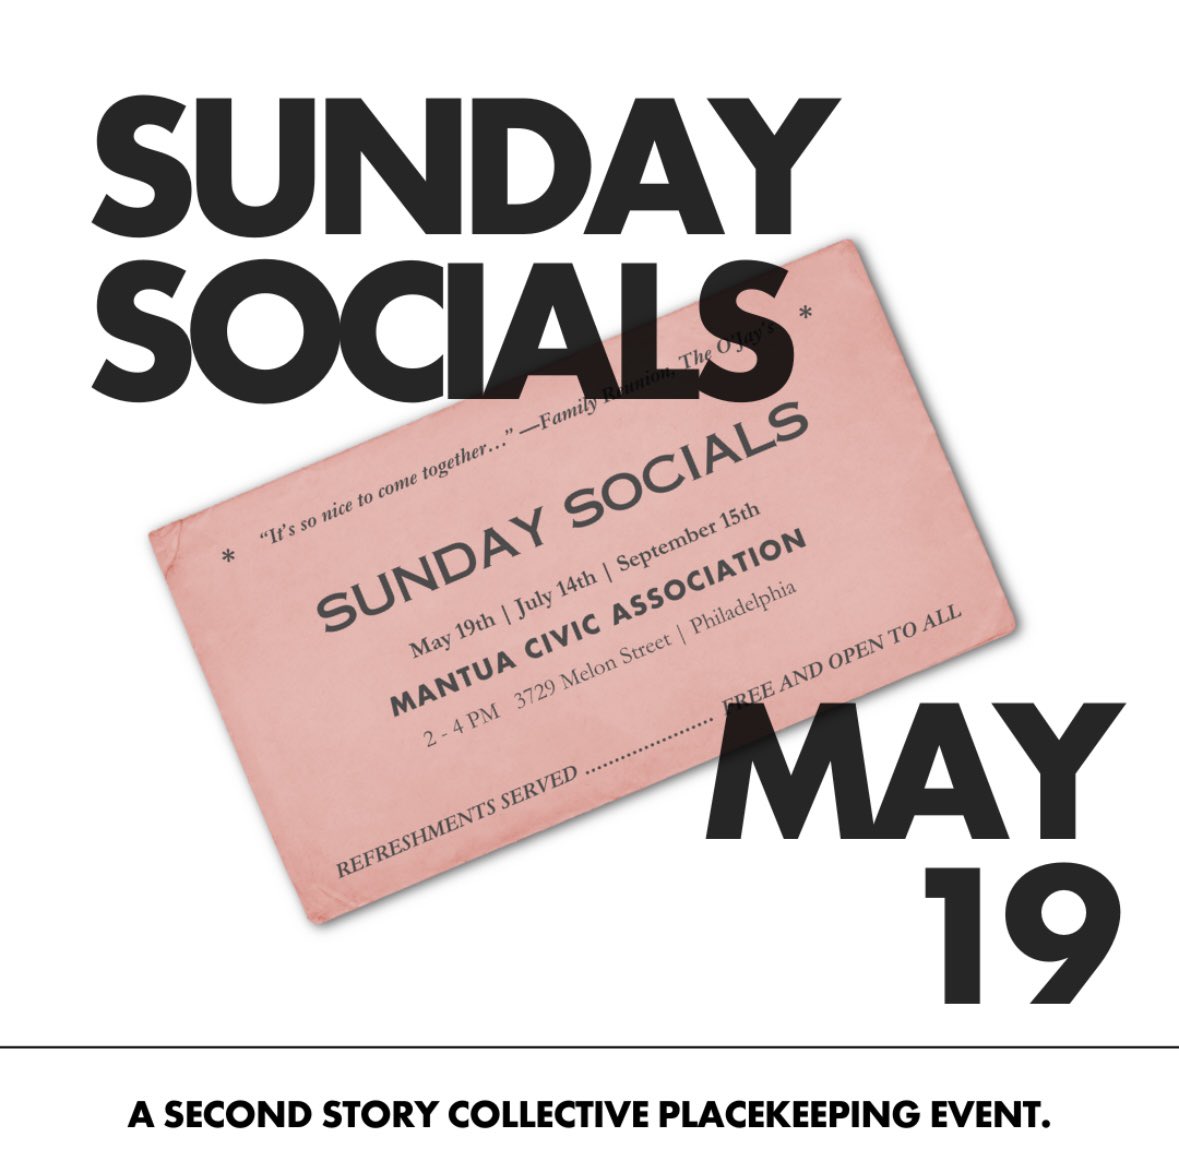 As part of Second Story Collective, we’re excited to invite Mantua residents, Drexel students, & interested community members to our first Placekeeping Community event on Sunday, May 19th from 2-4pm at Mantua Civic Association! We’ll have food, arts activities, & music! All free.